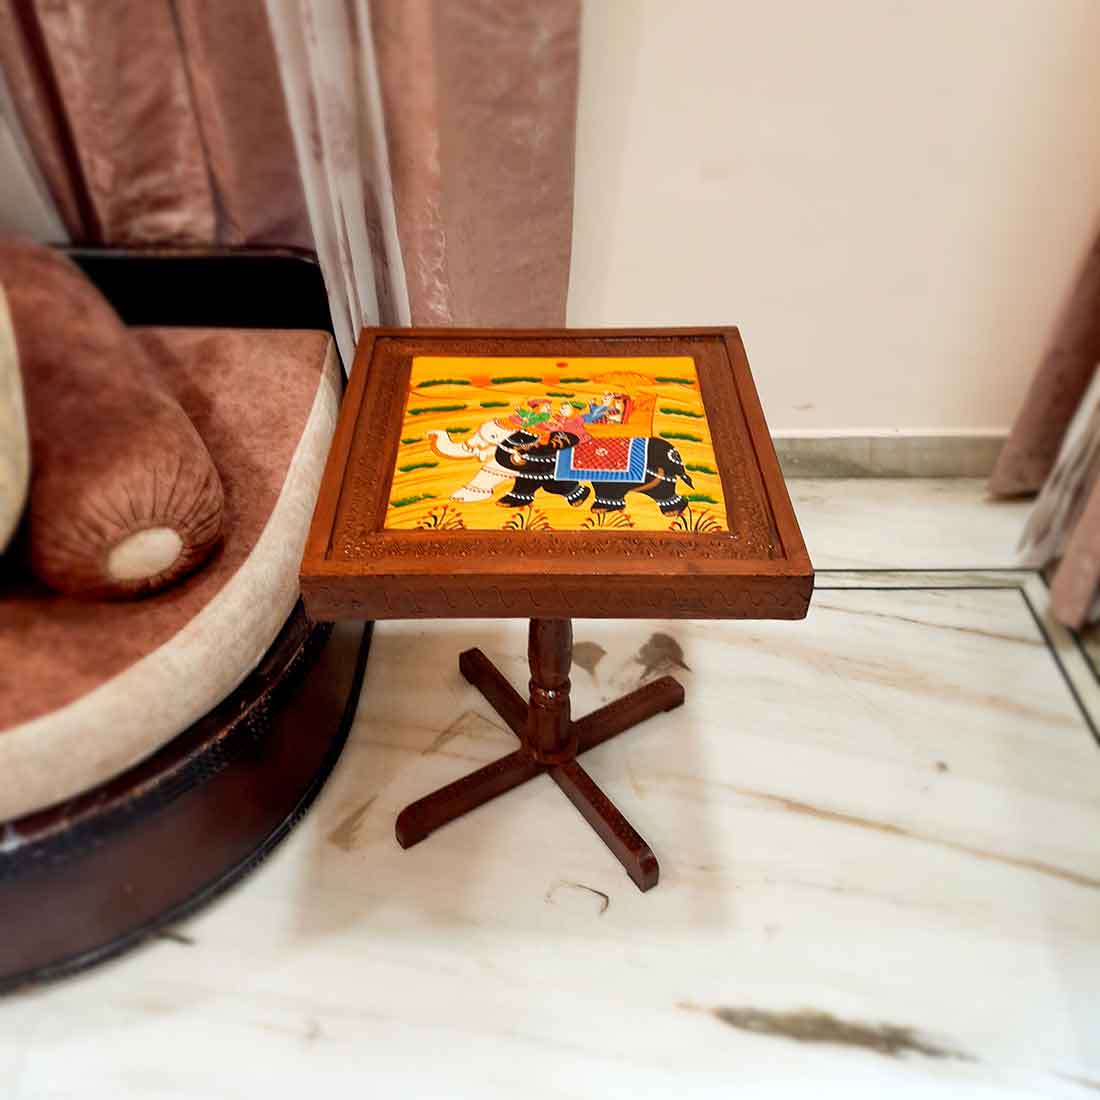 Products Side Table | Wooden End Table Set - for Living Room, Sofa Corners, Home & Office Decor & Gifts - 20 Inch - Apkamart